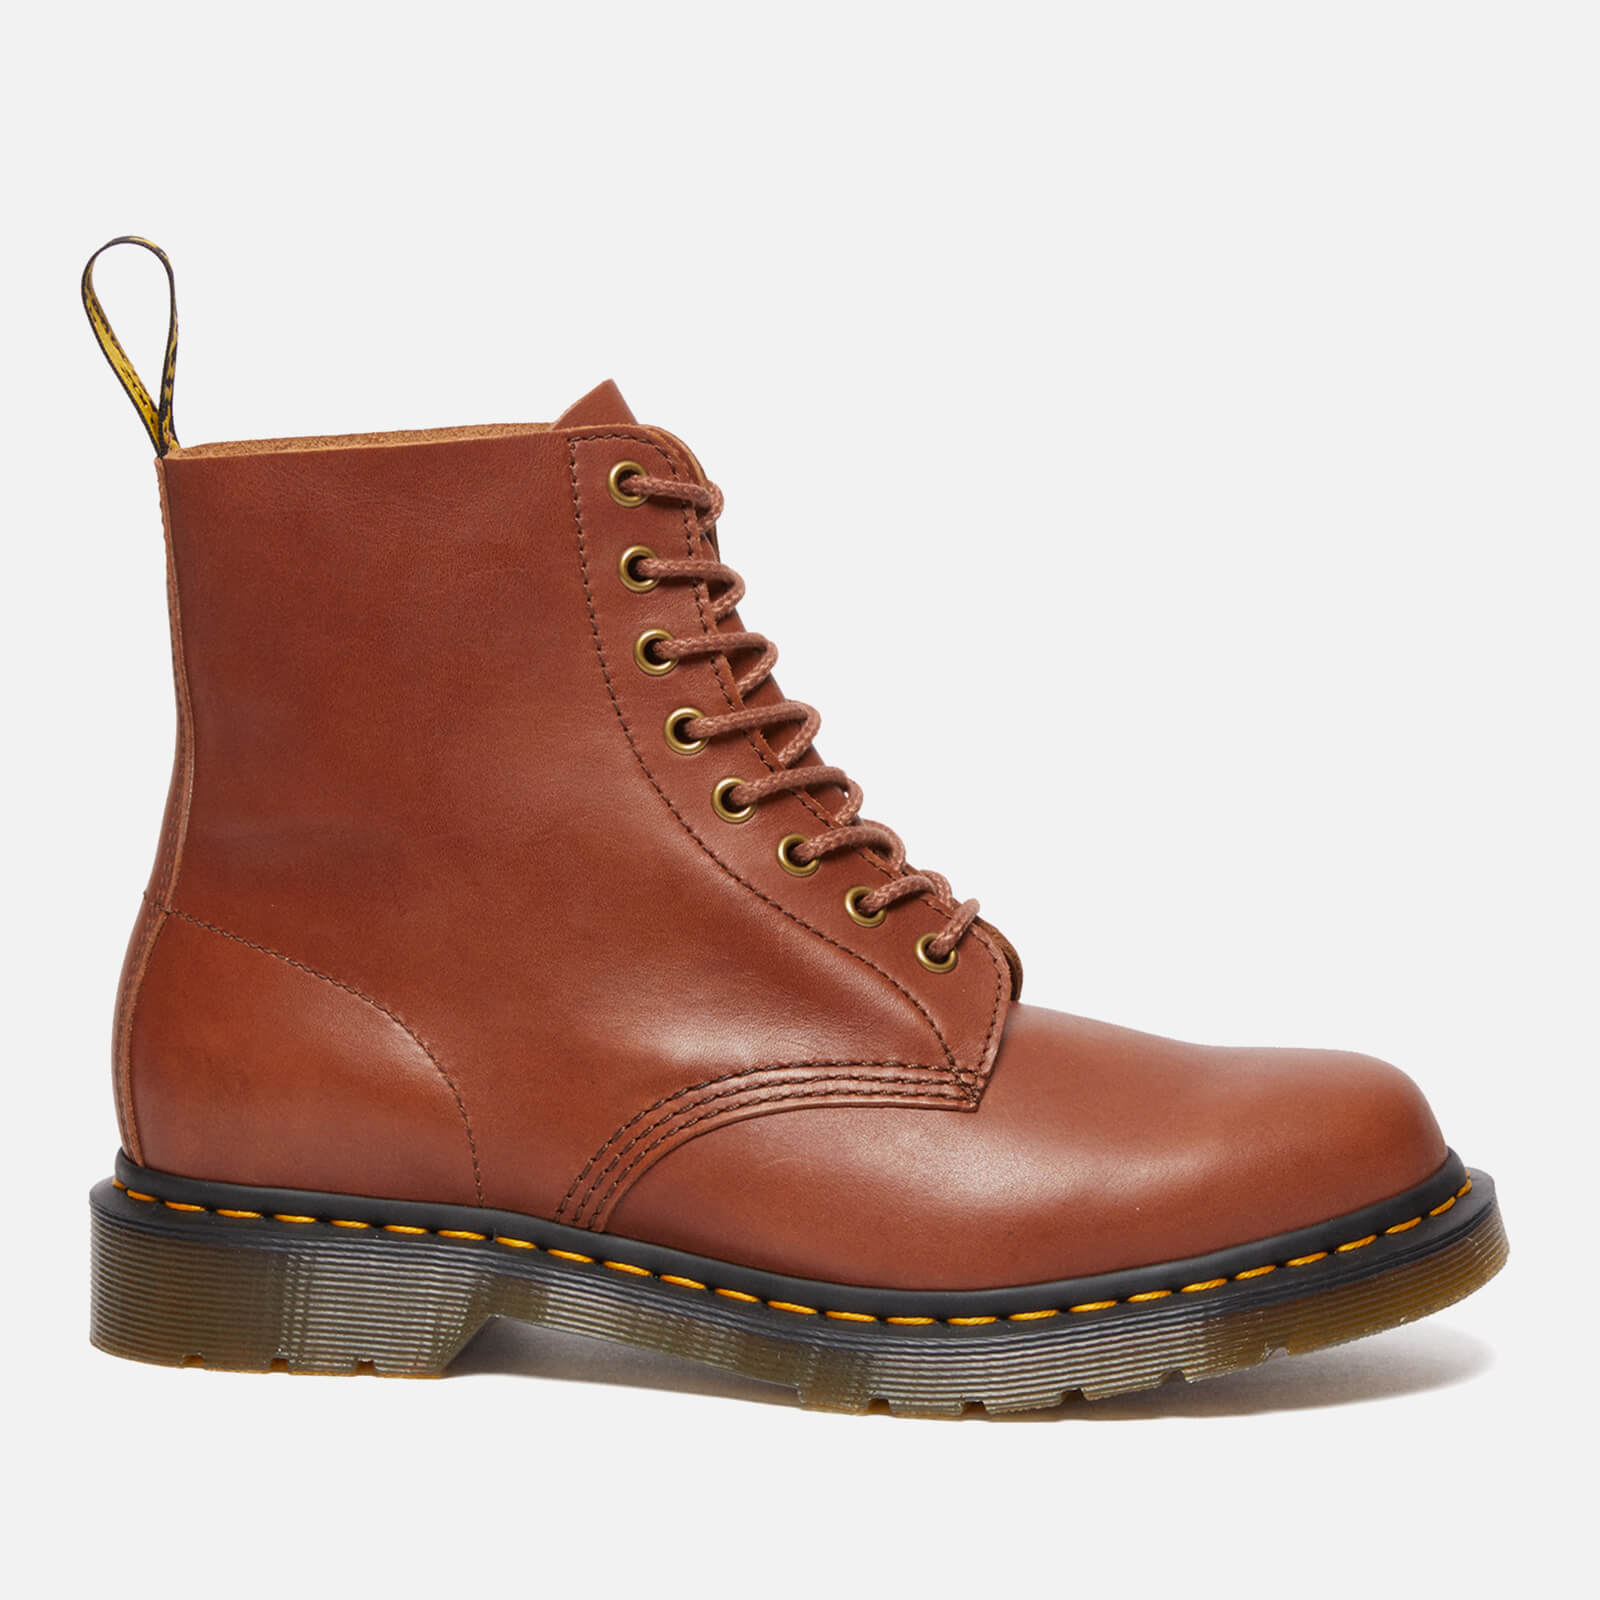 Dr. Martens Men’s 1460 Pascal Leather 8-Eye Boots